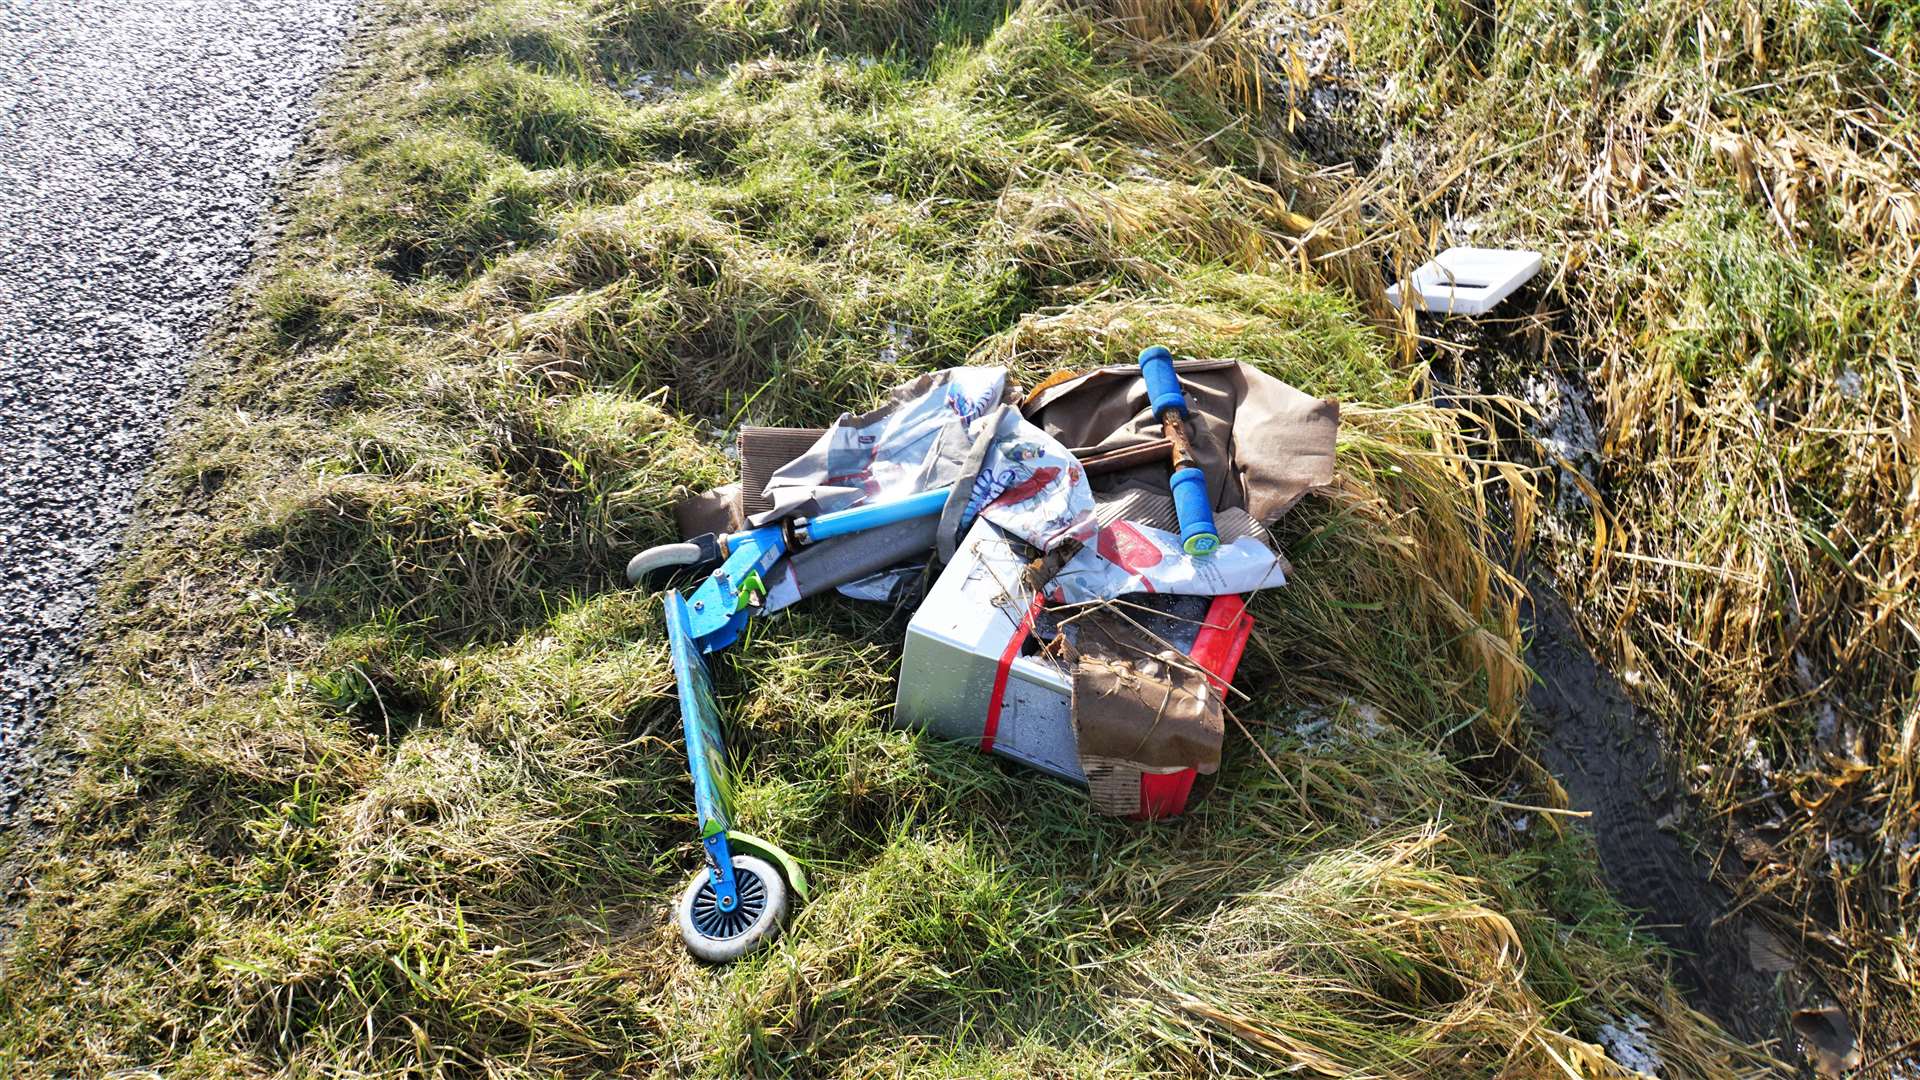 A child's scooter and various other items dumped at the side of the Tannach road.